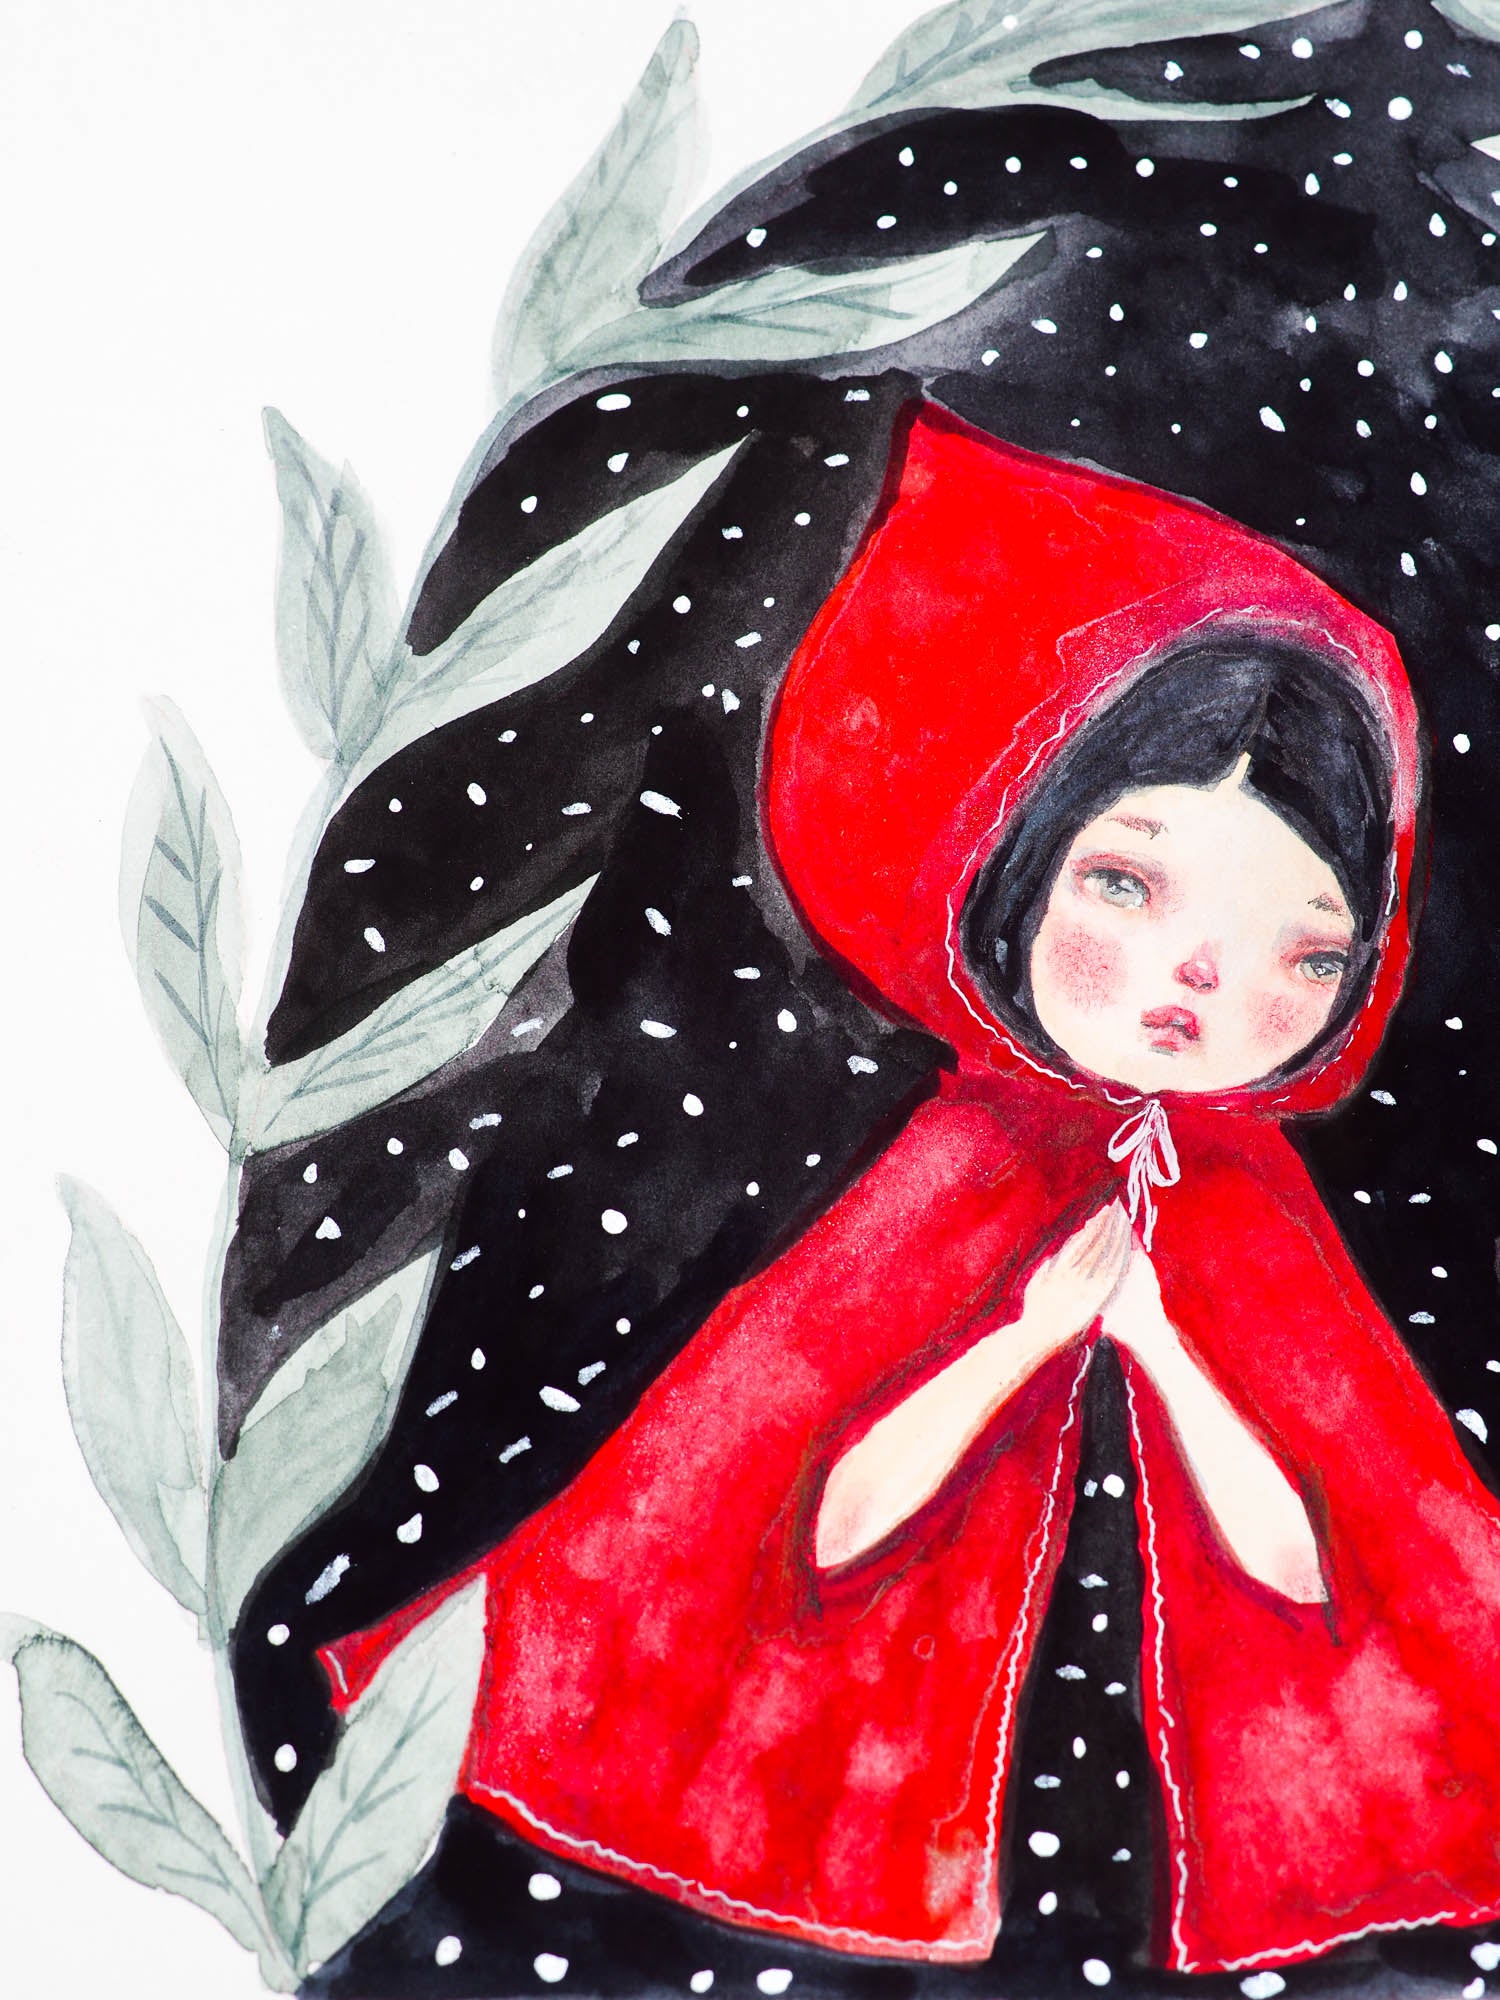 Danita loves painting Little Red riding Hood and the Wolf. This time, it's a 8 x 8 watercolor original, where I painted the wold in gray and silver paint and Little Red Riding Hood is wearing a bright red cape with intricate watercolor shades and silverly thread details on her cape.